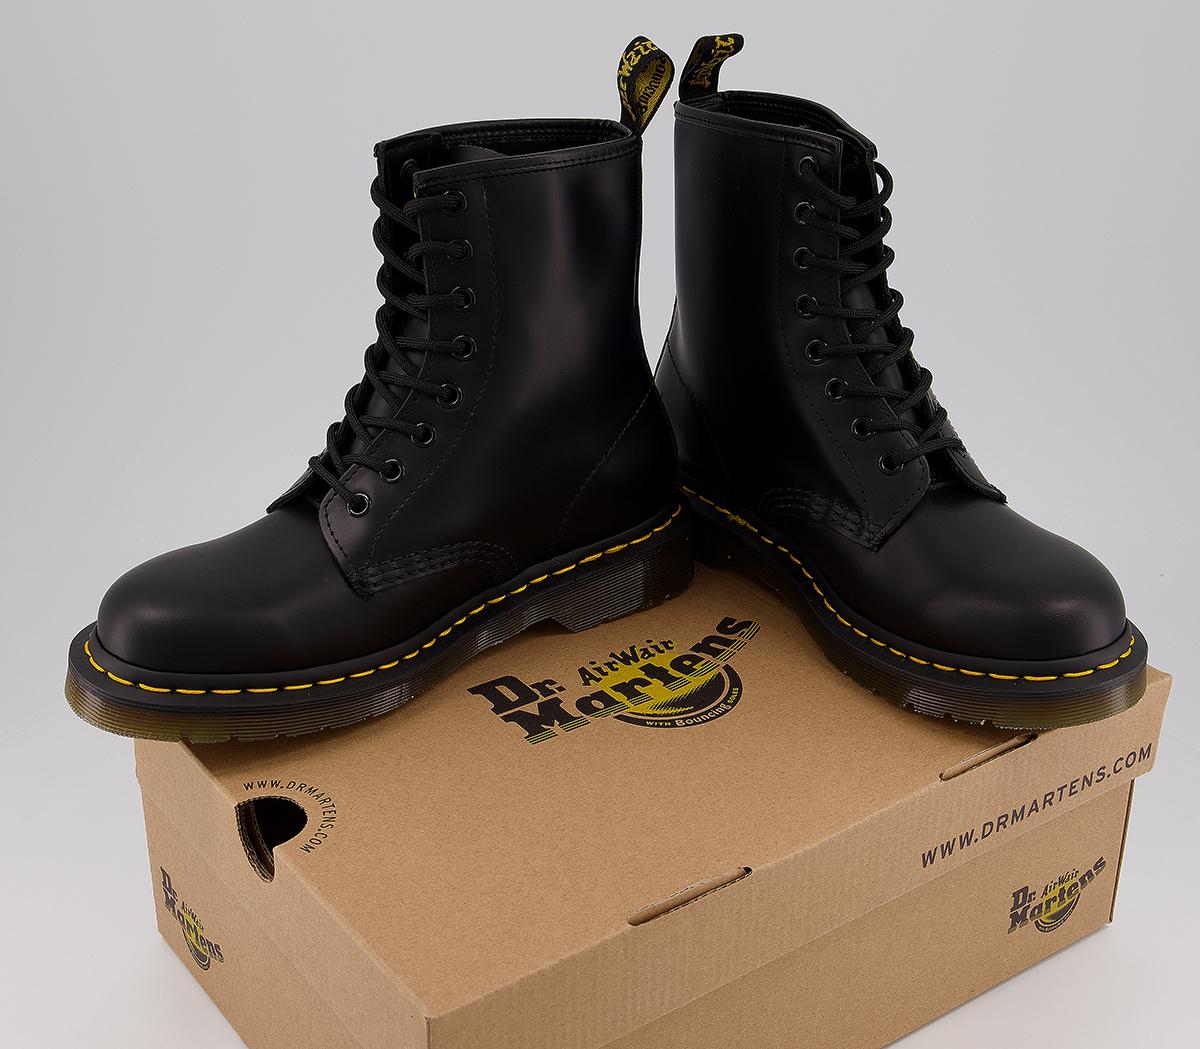 Dr. Martens 8 Eyelet Lace Up Boots F Black - Women's Ankle Boots